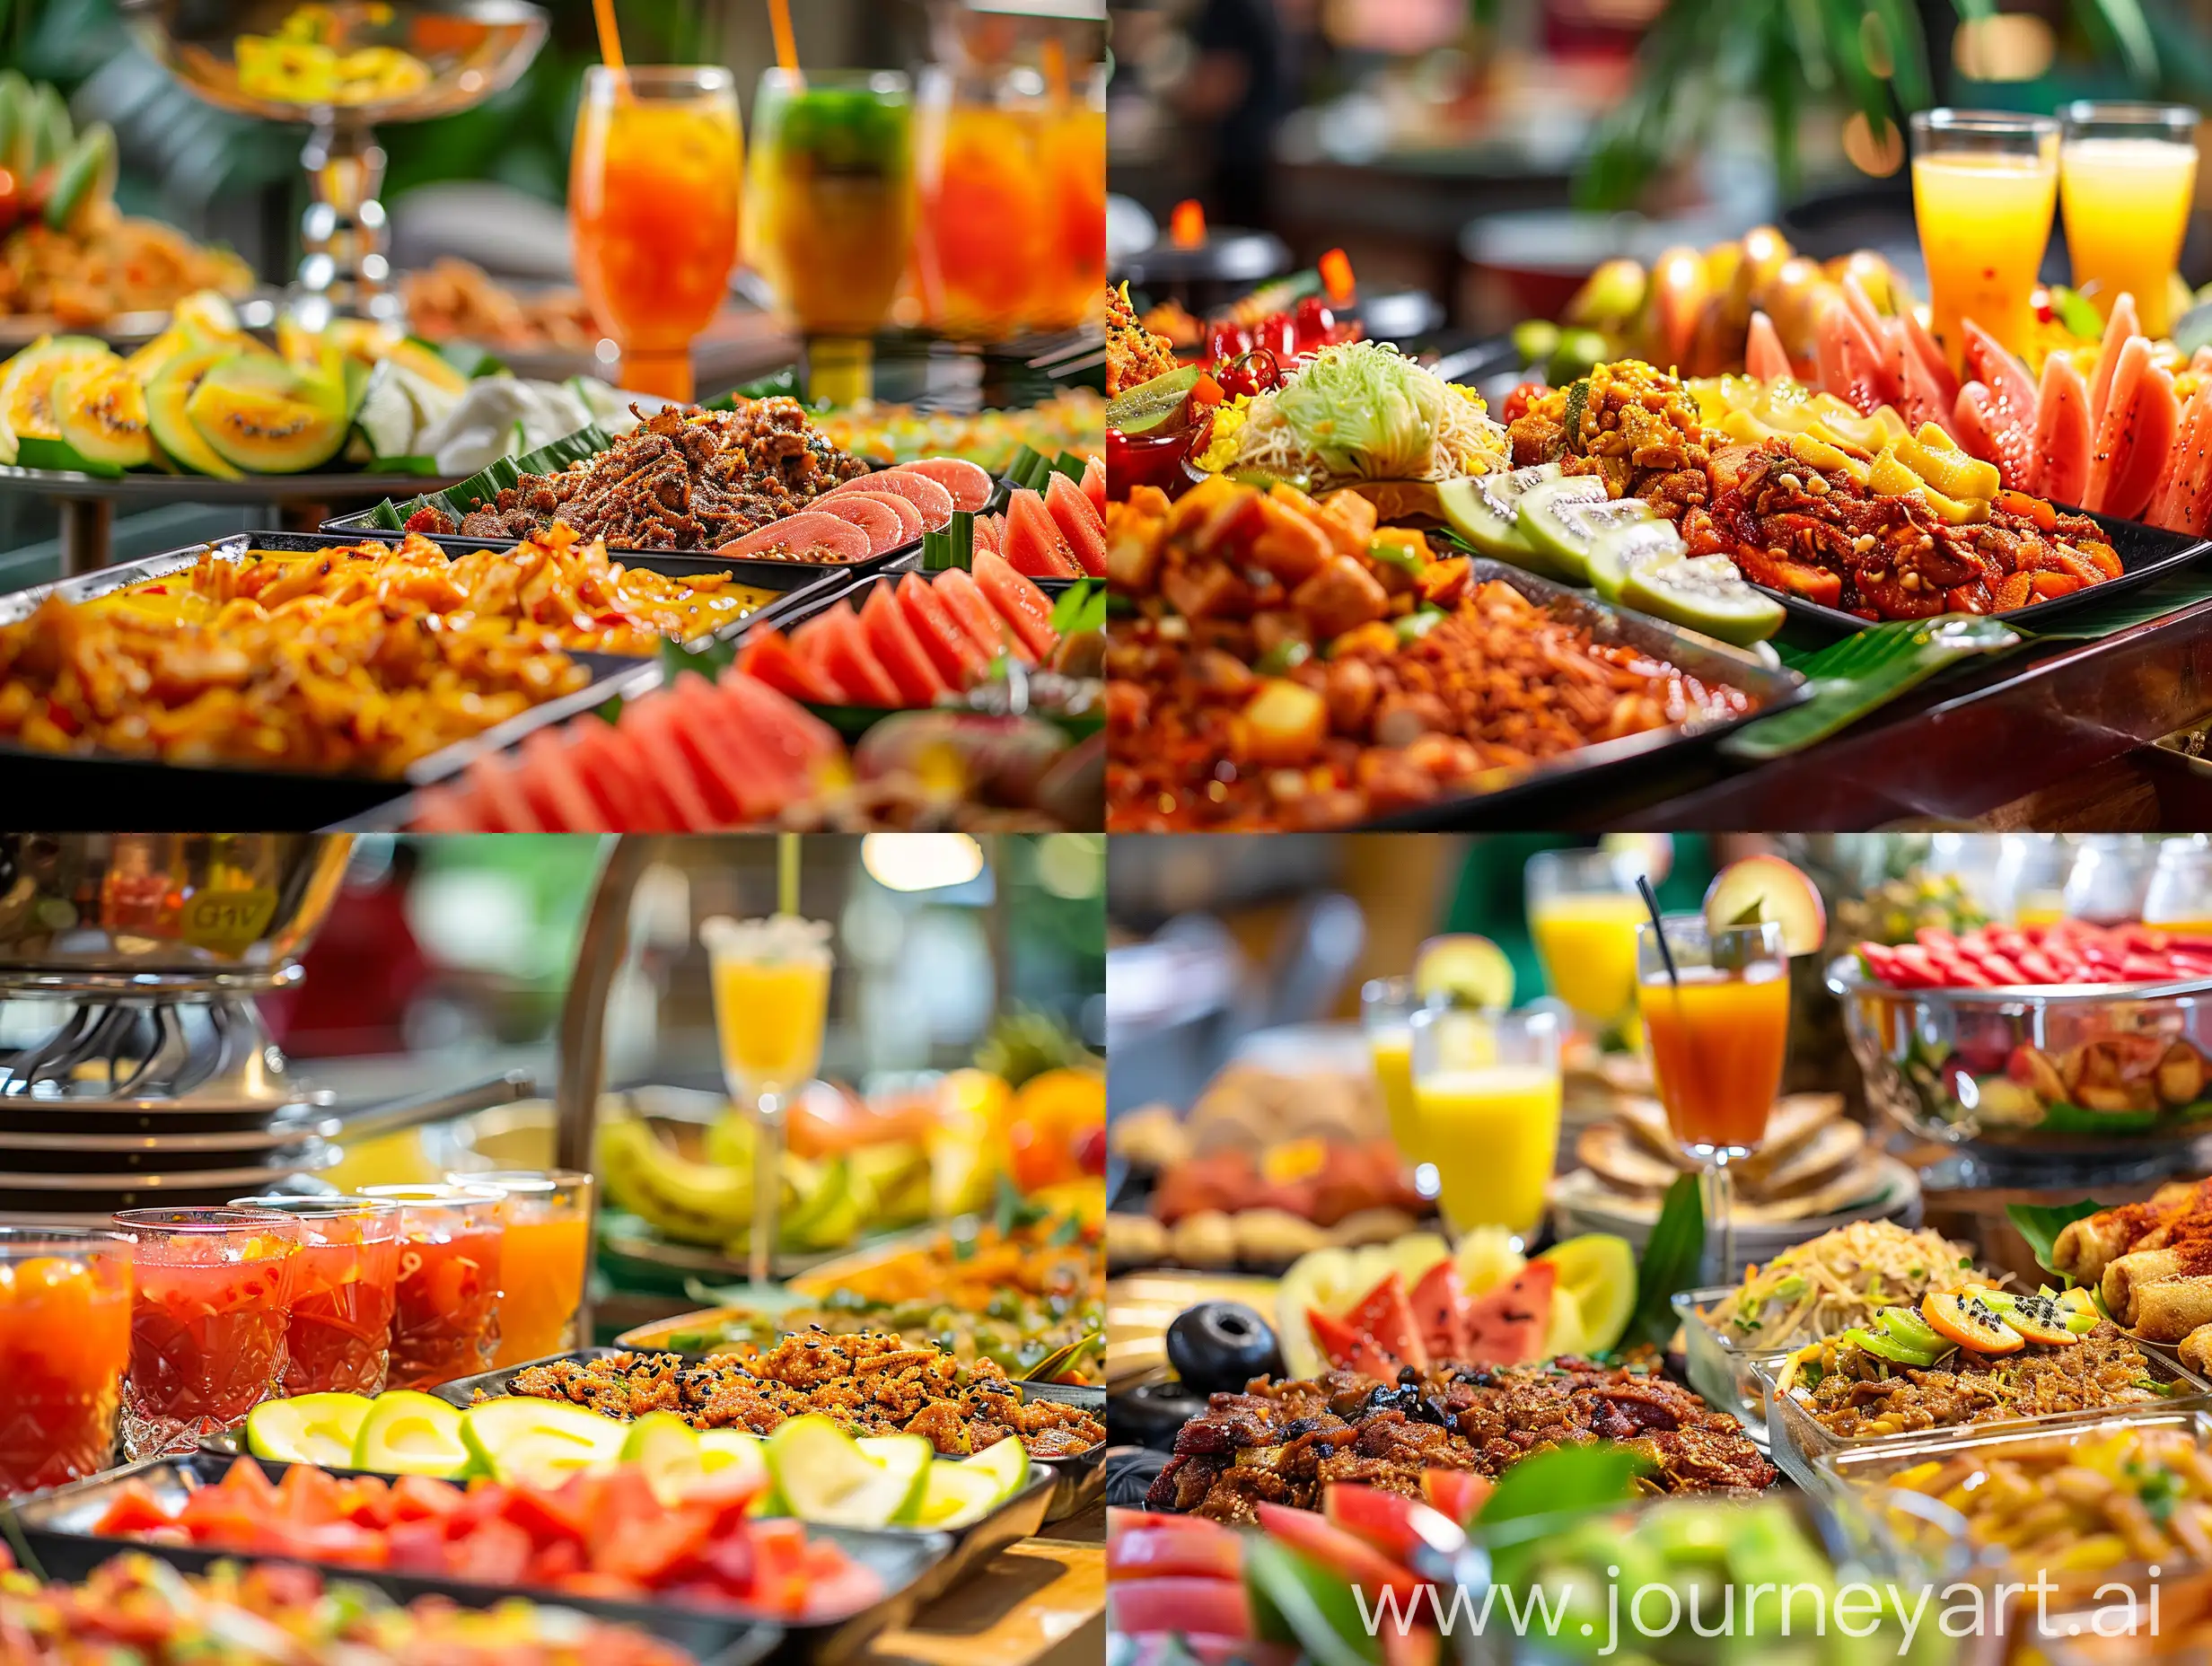 Indonesian-Catering-Buffet-Vibrant-Food-Spread-with-Fruit-Slices-and-Juice